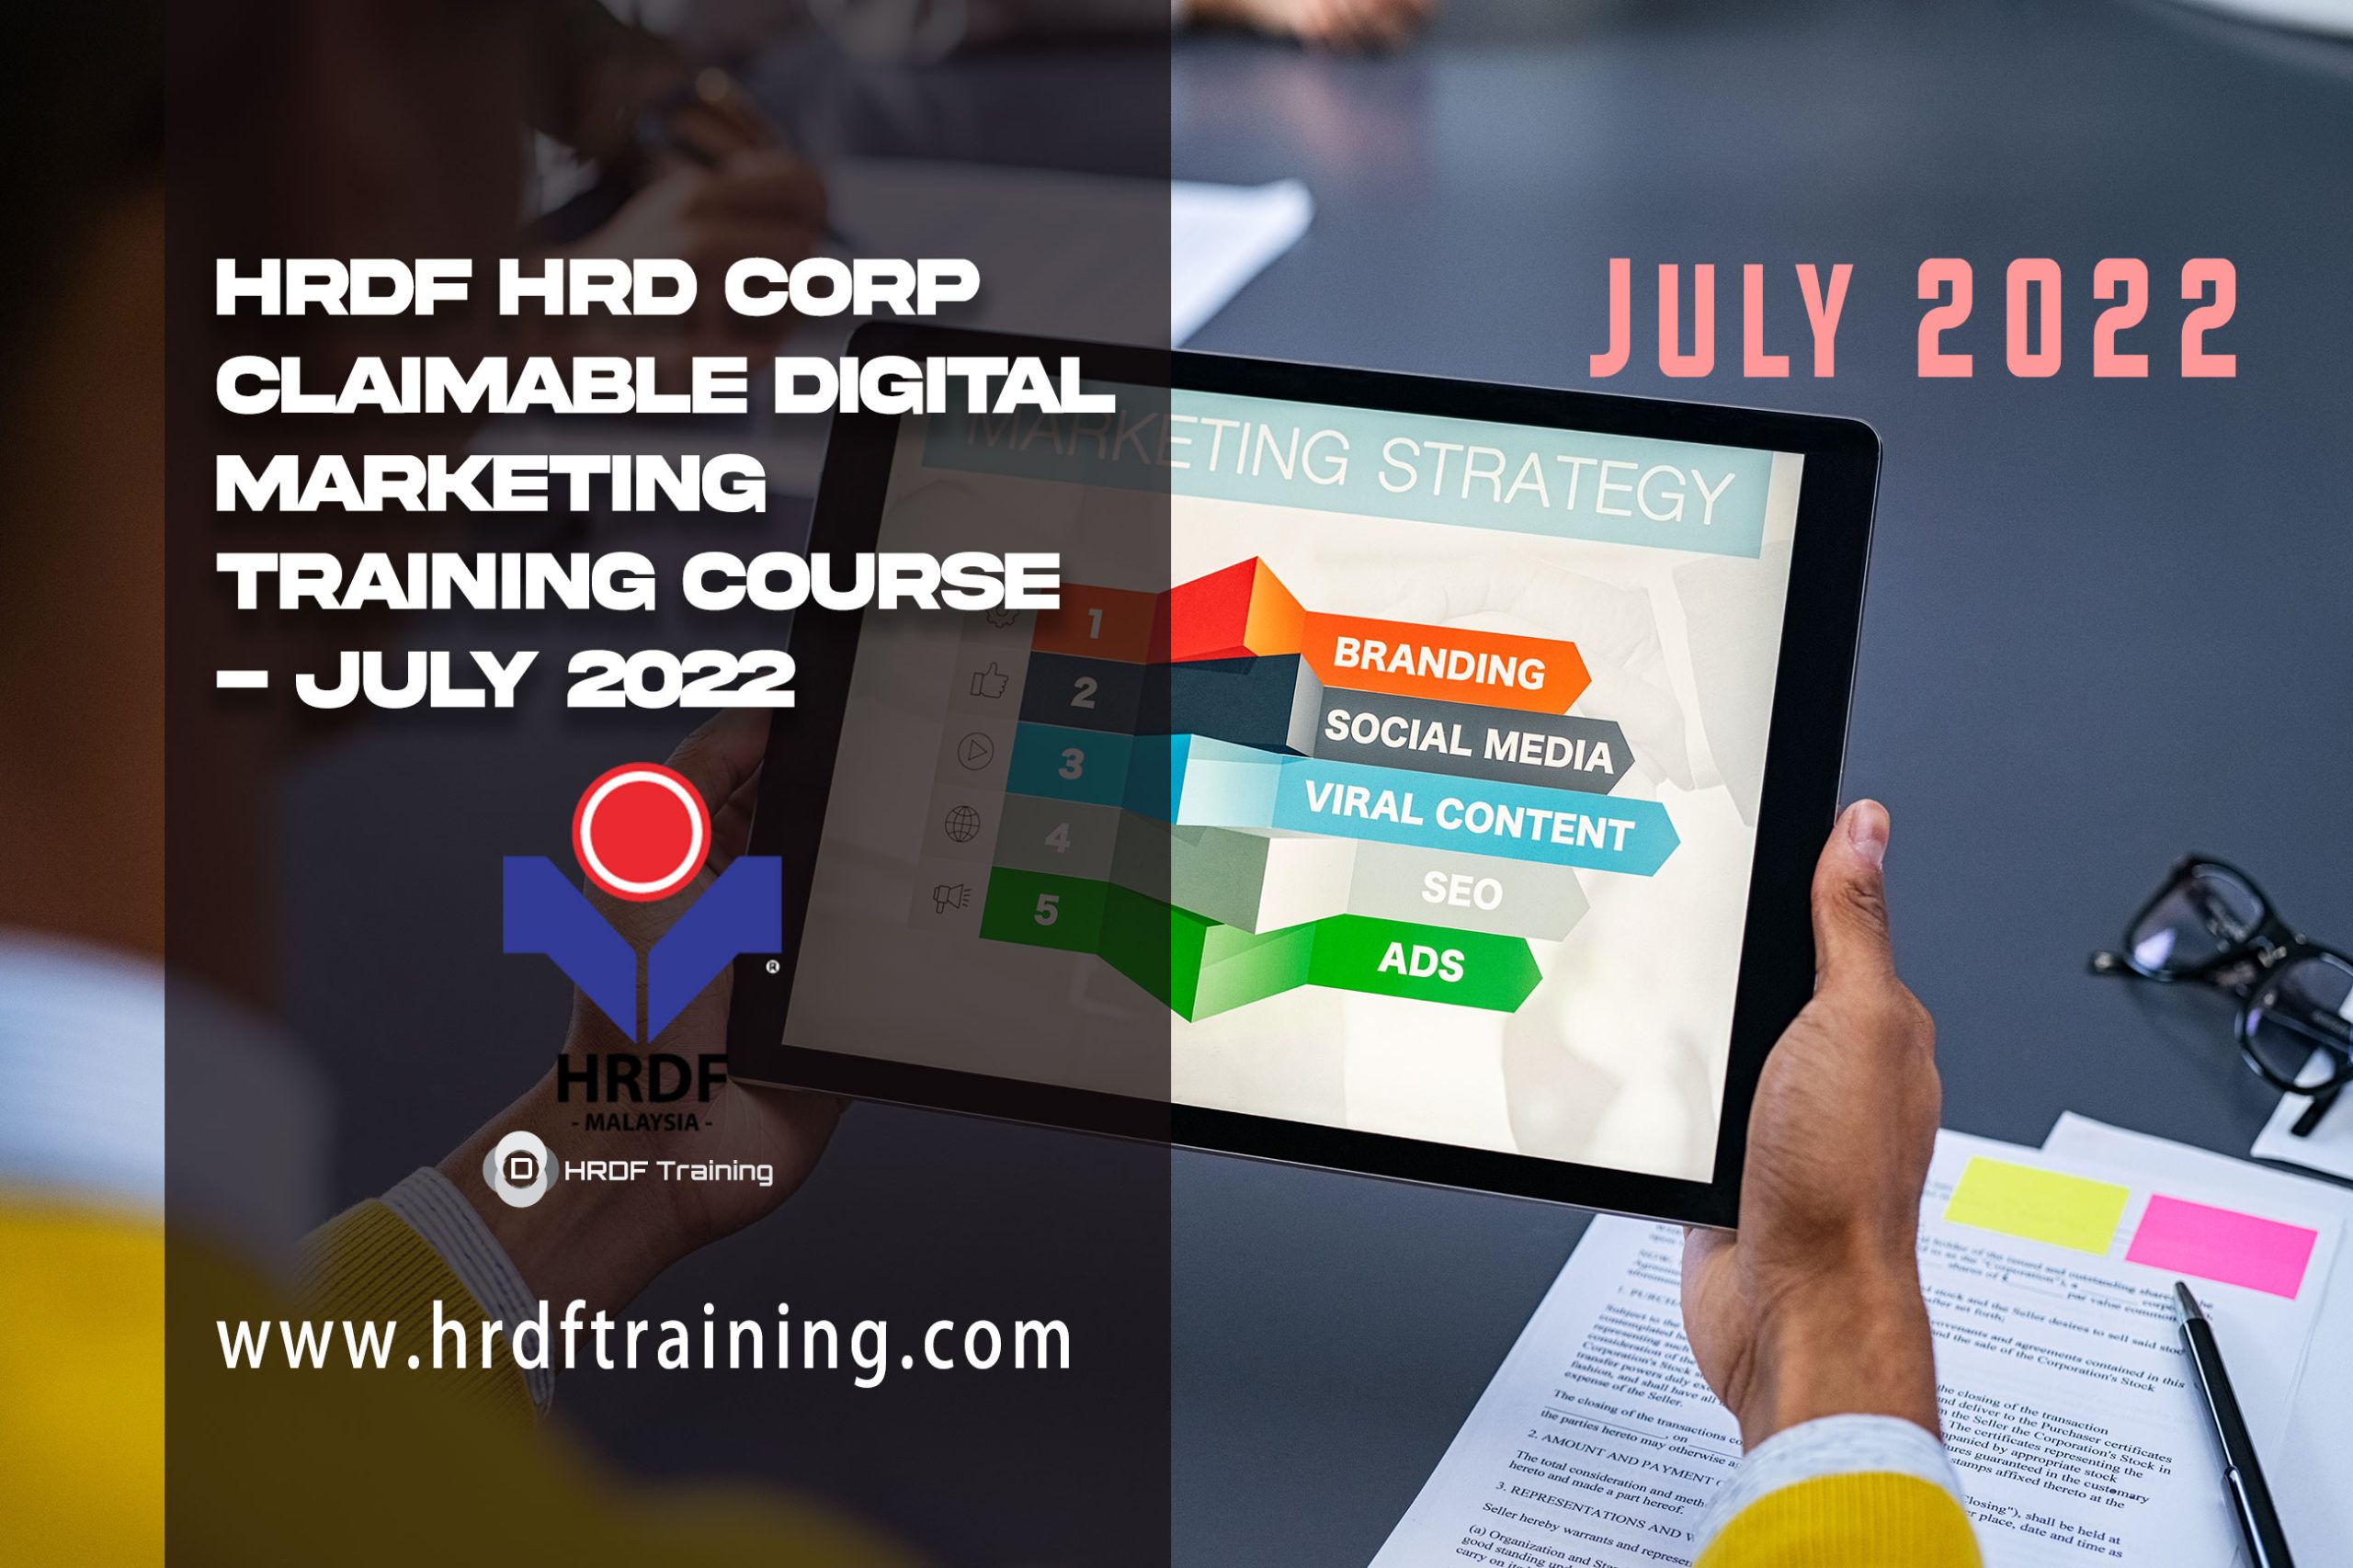 HRDF HRD Corp Claimable Digital Marketing Training Course - July 2022